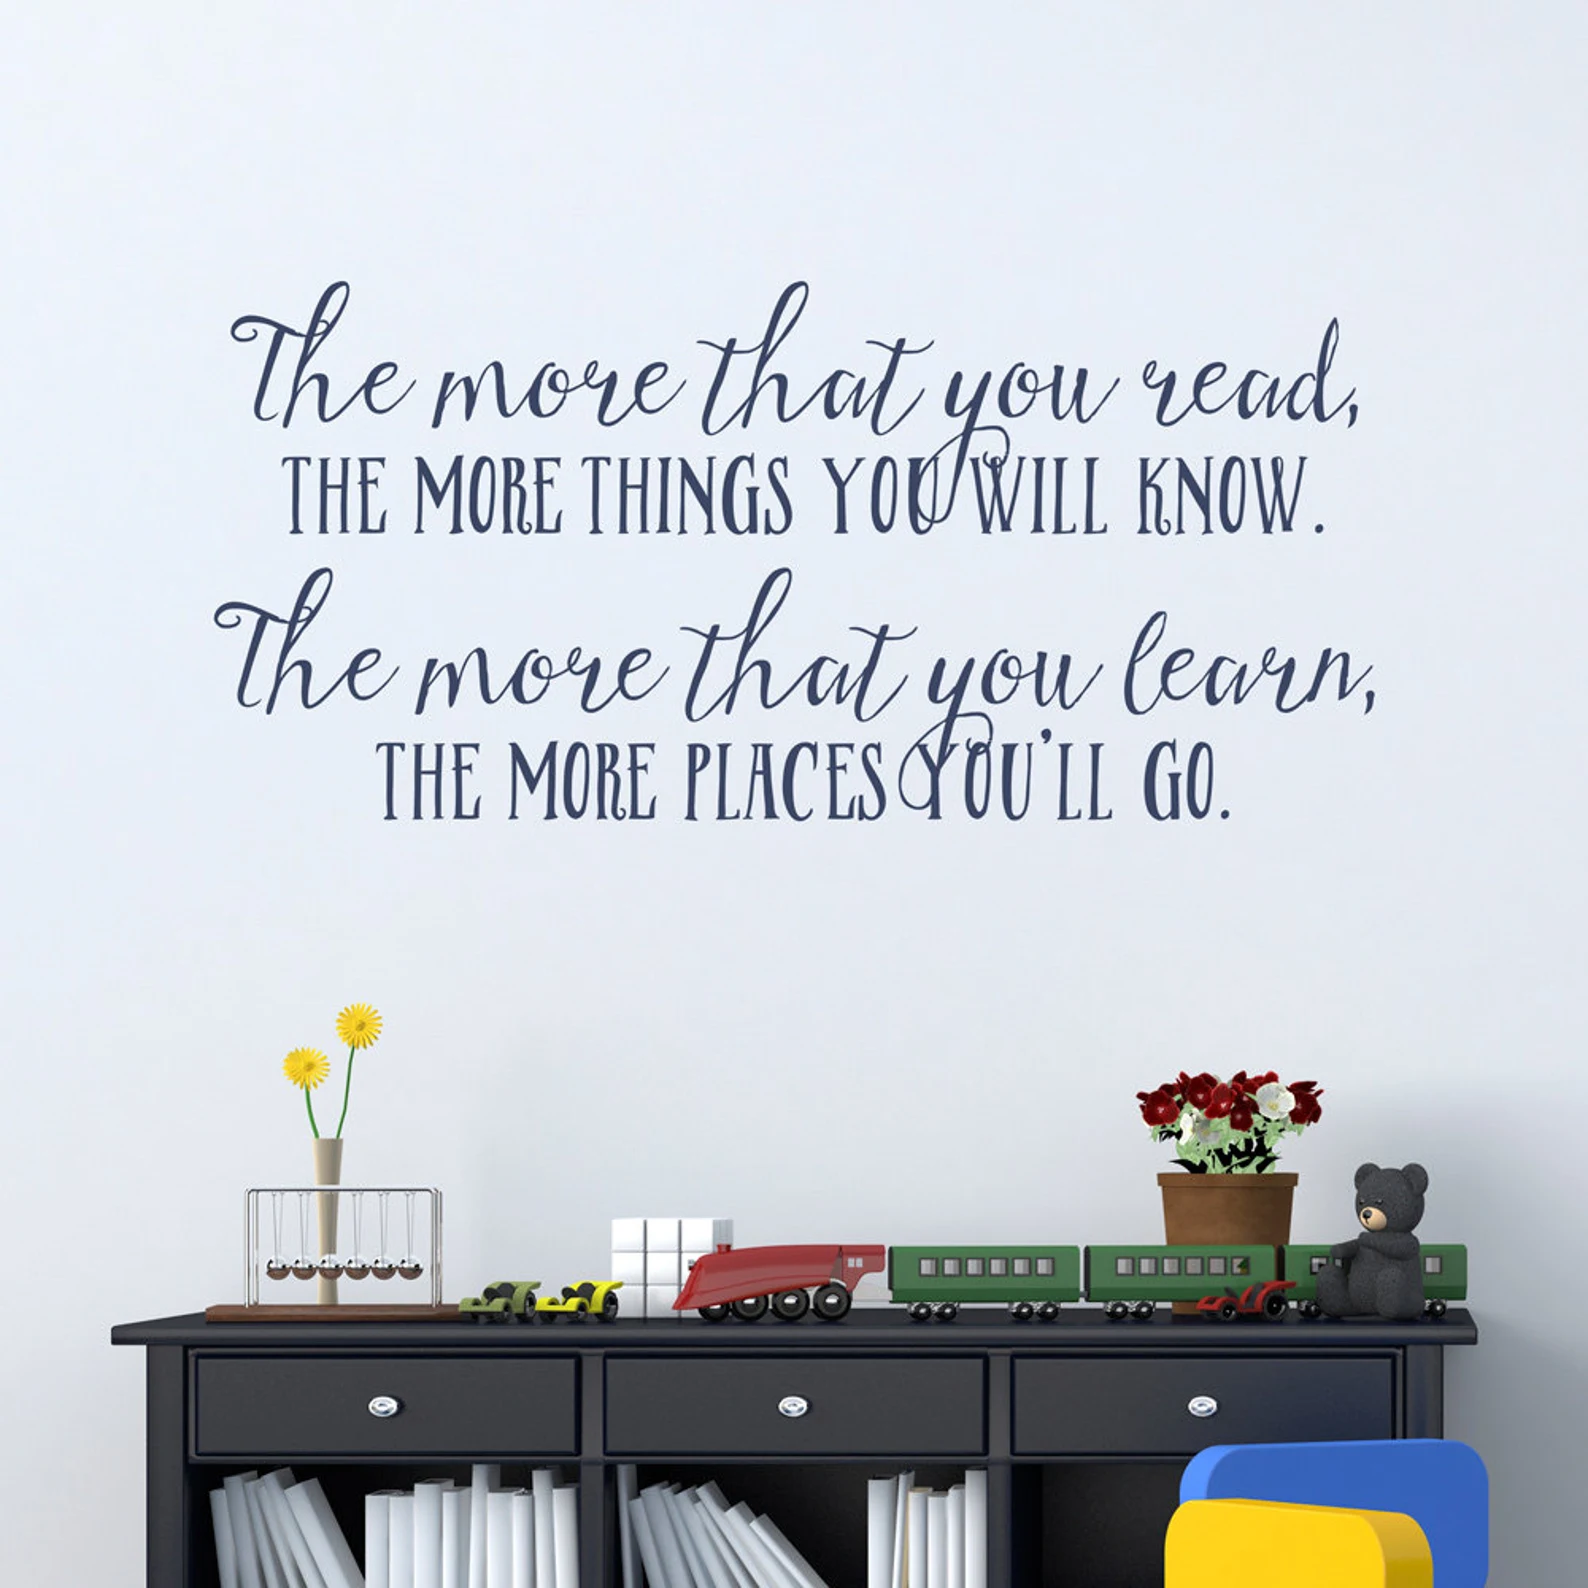 a wall decal that says "The more that you read, the more things you will know. The more that you learn, the more places you'll go." – Dr. Seuss